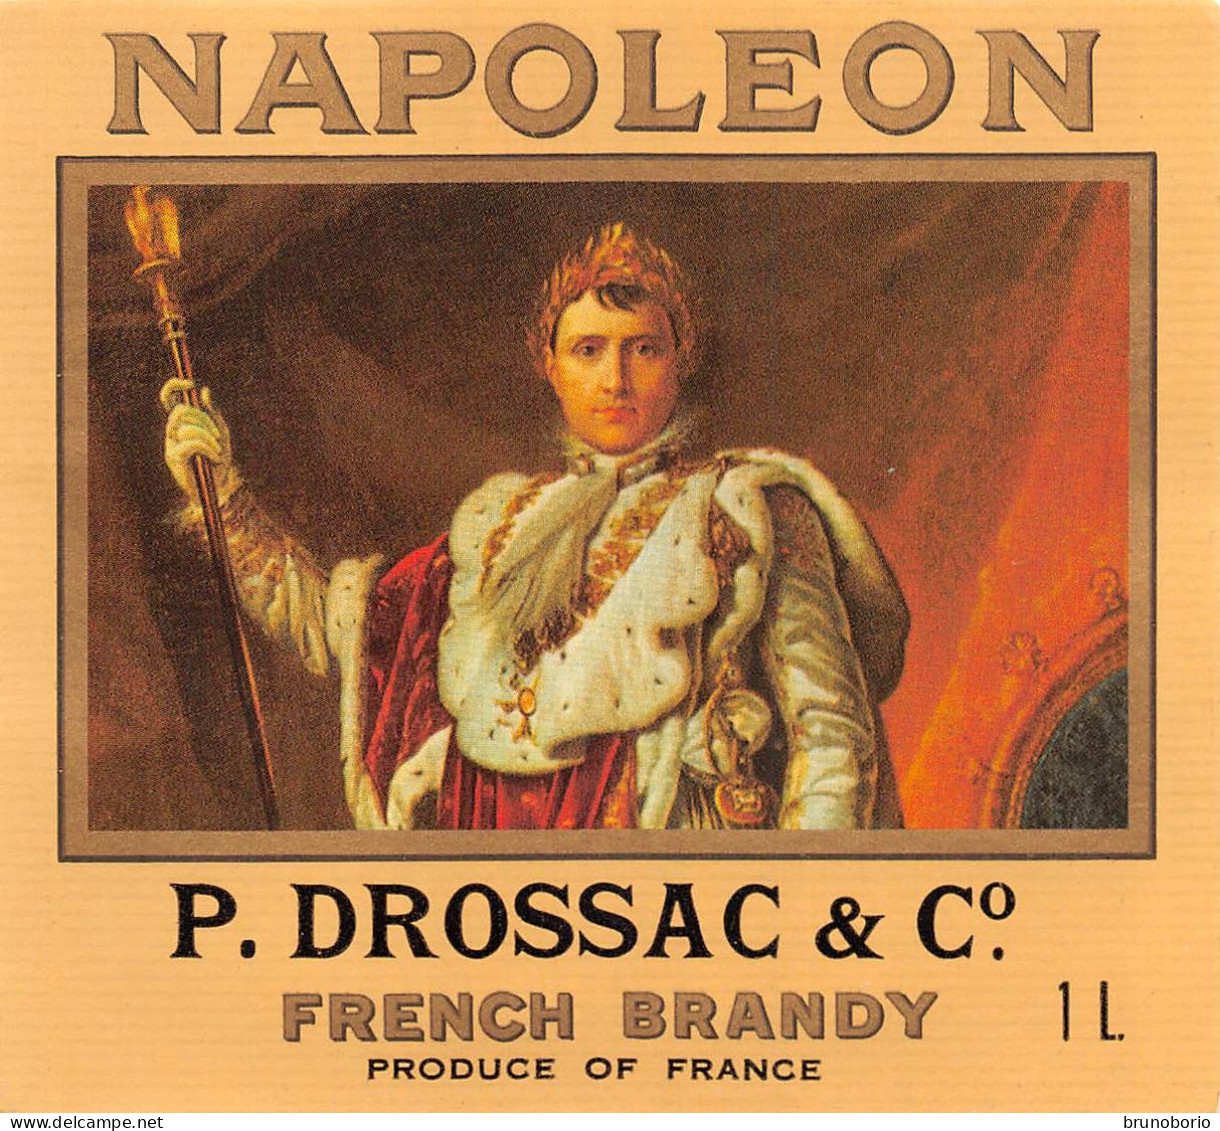 00045 "NAPOLEON - T. DROSSAC & C°. - FRENCH BRANDY - PRODUCE OF FRANCE" ETICH. ORIG. ANIMATA - Alcoholes Y Licores